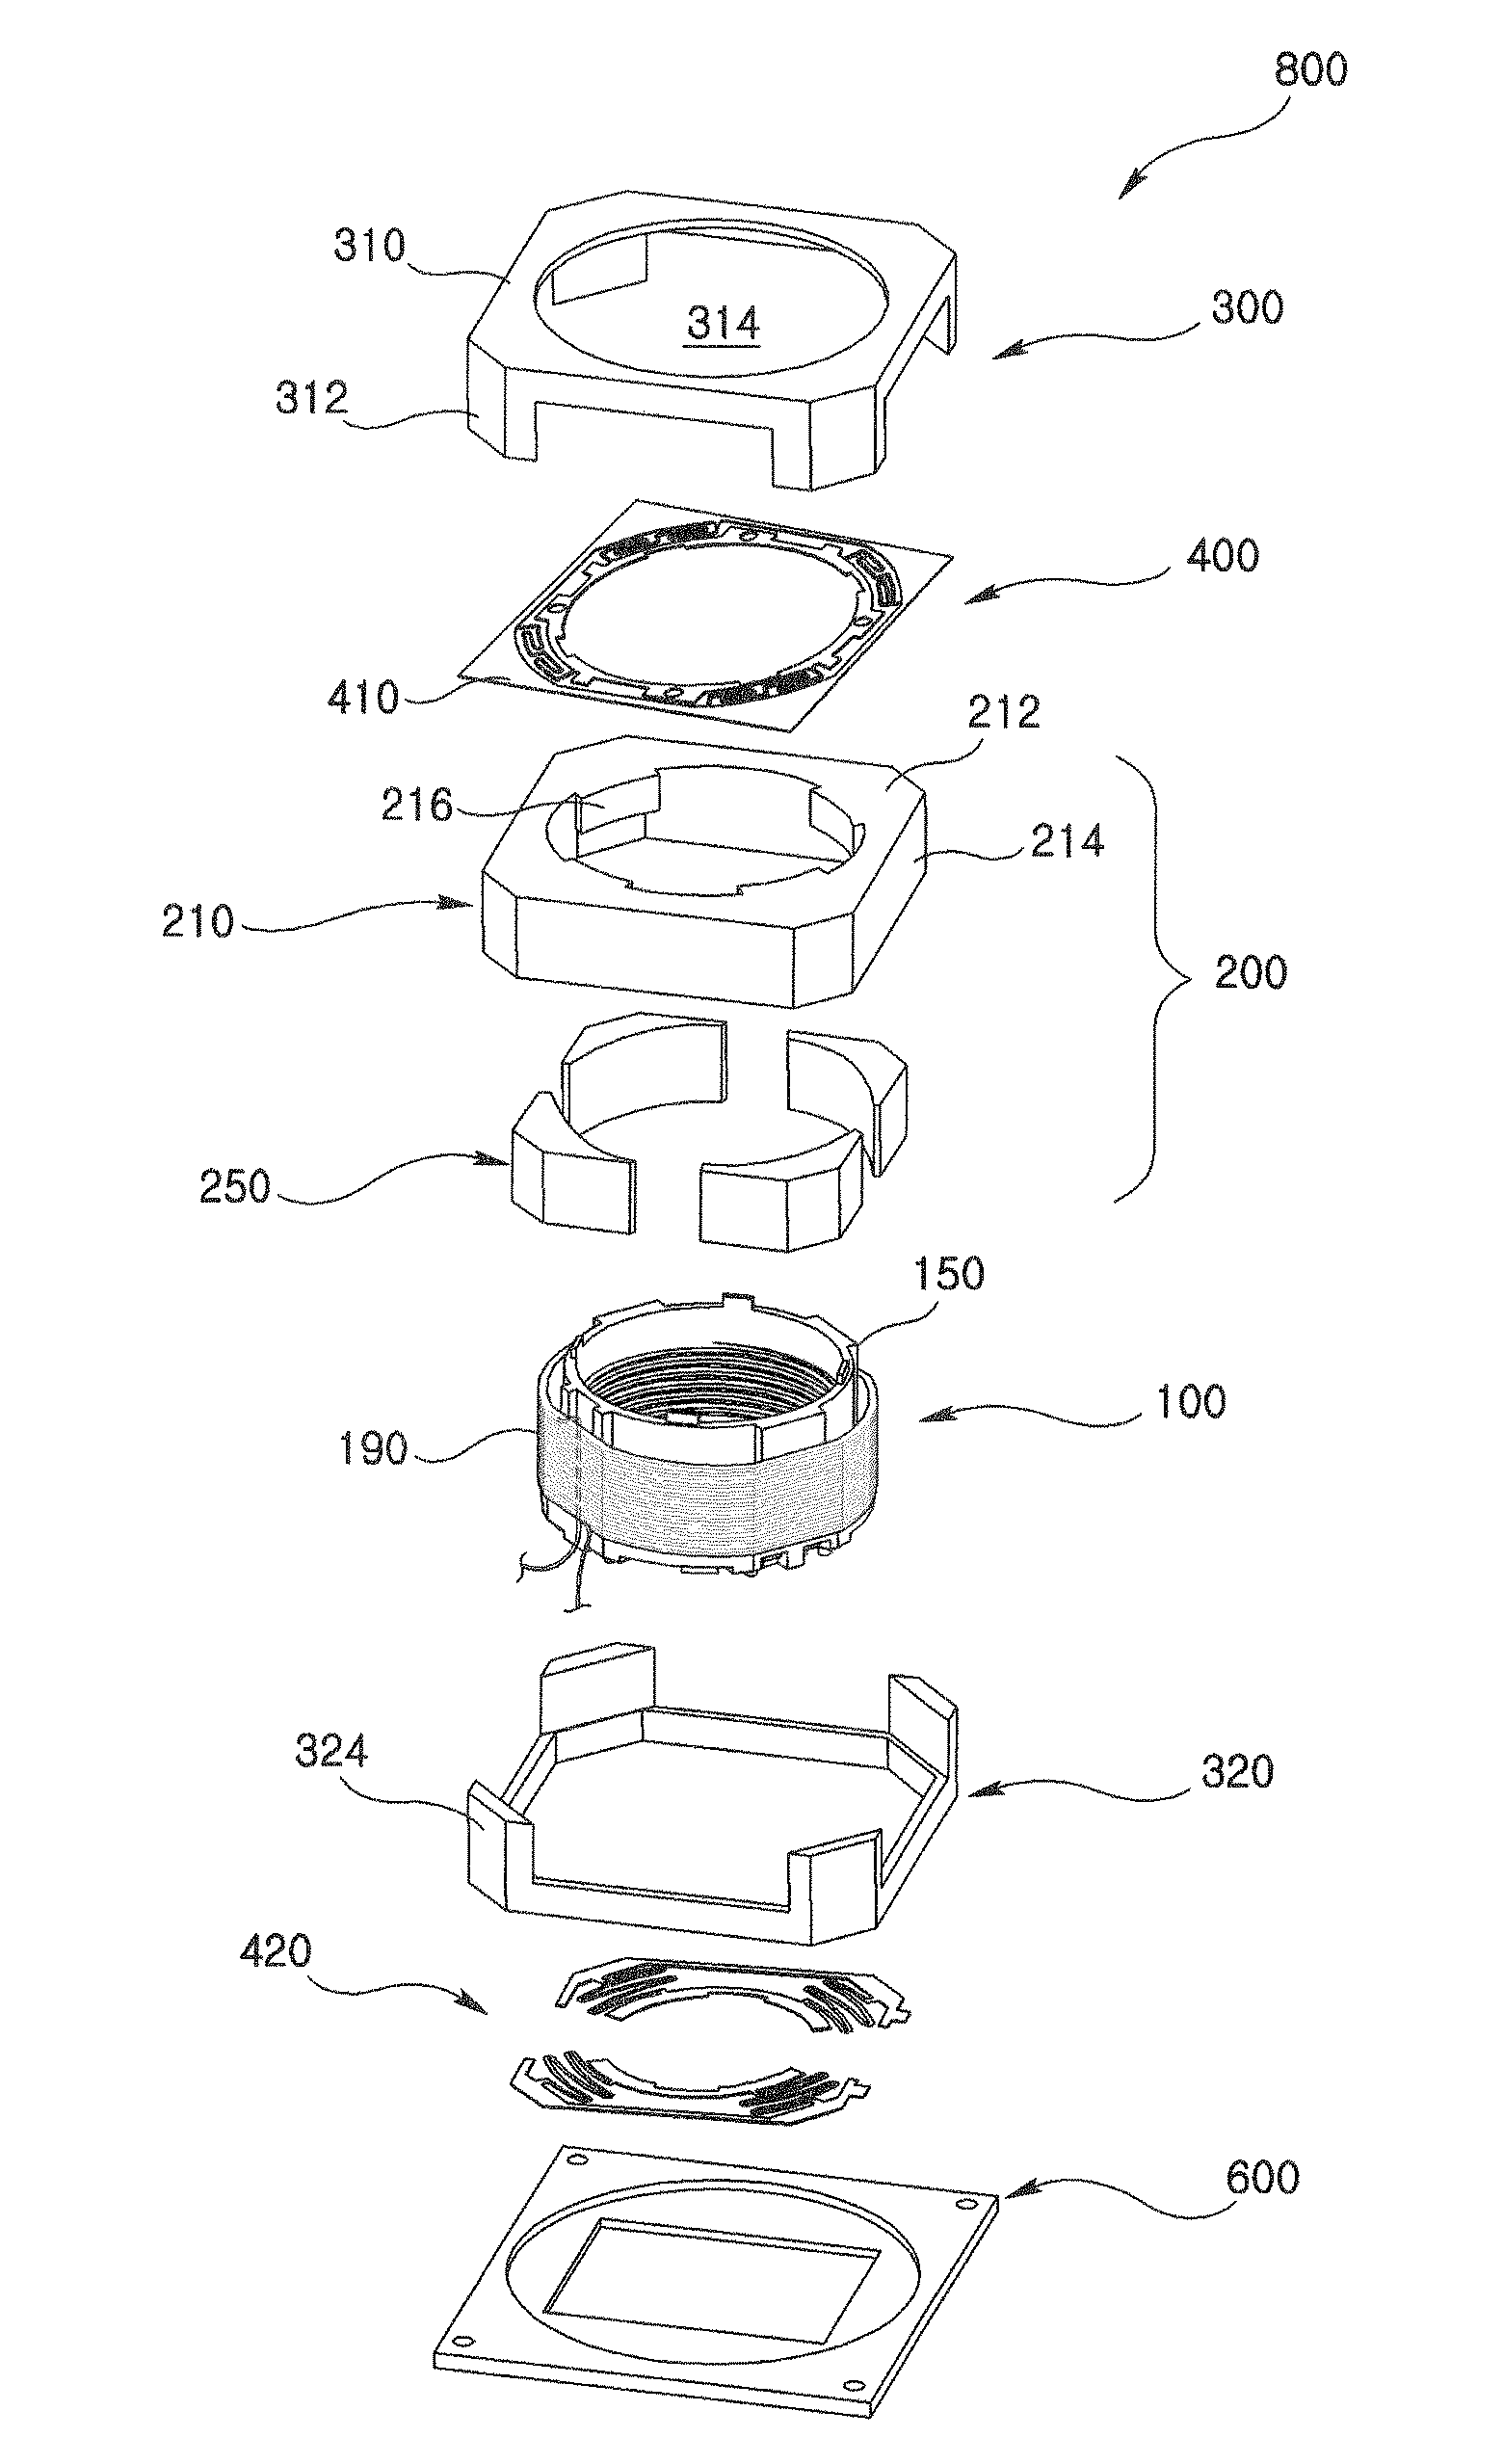 Voice coil motor, coil block for voice coil motor, method of manufacturing the coil block, and voice coil motor having the coil block